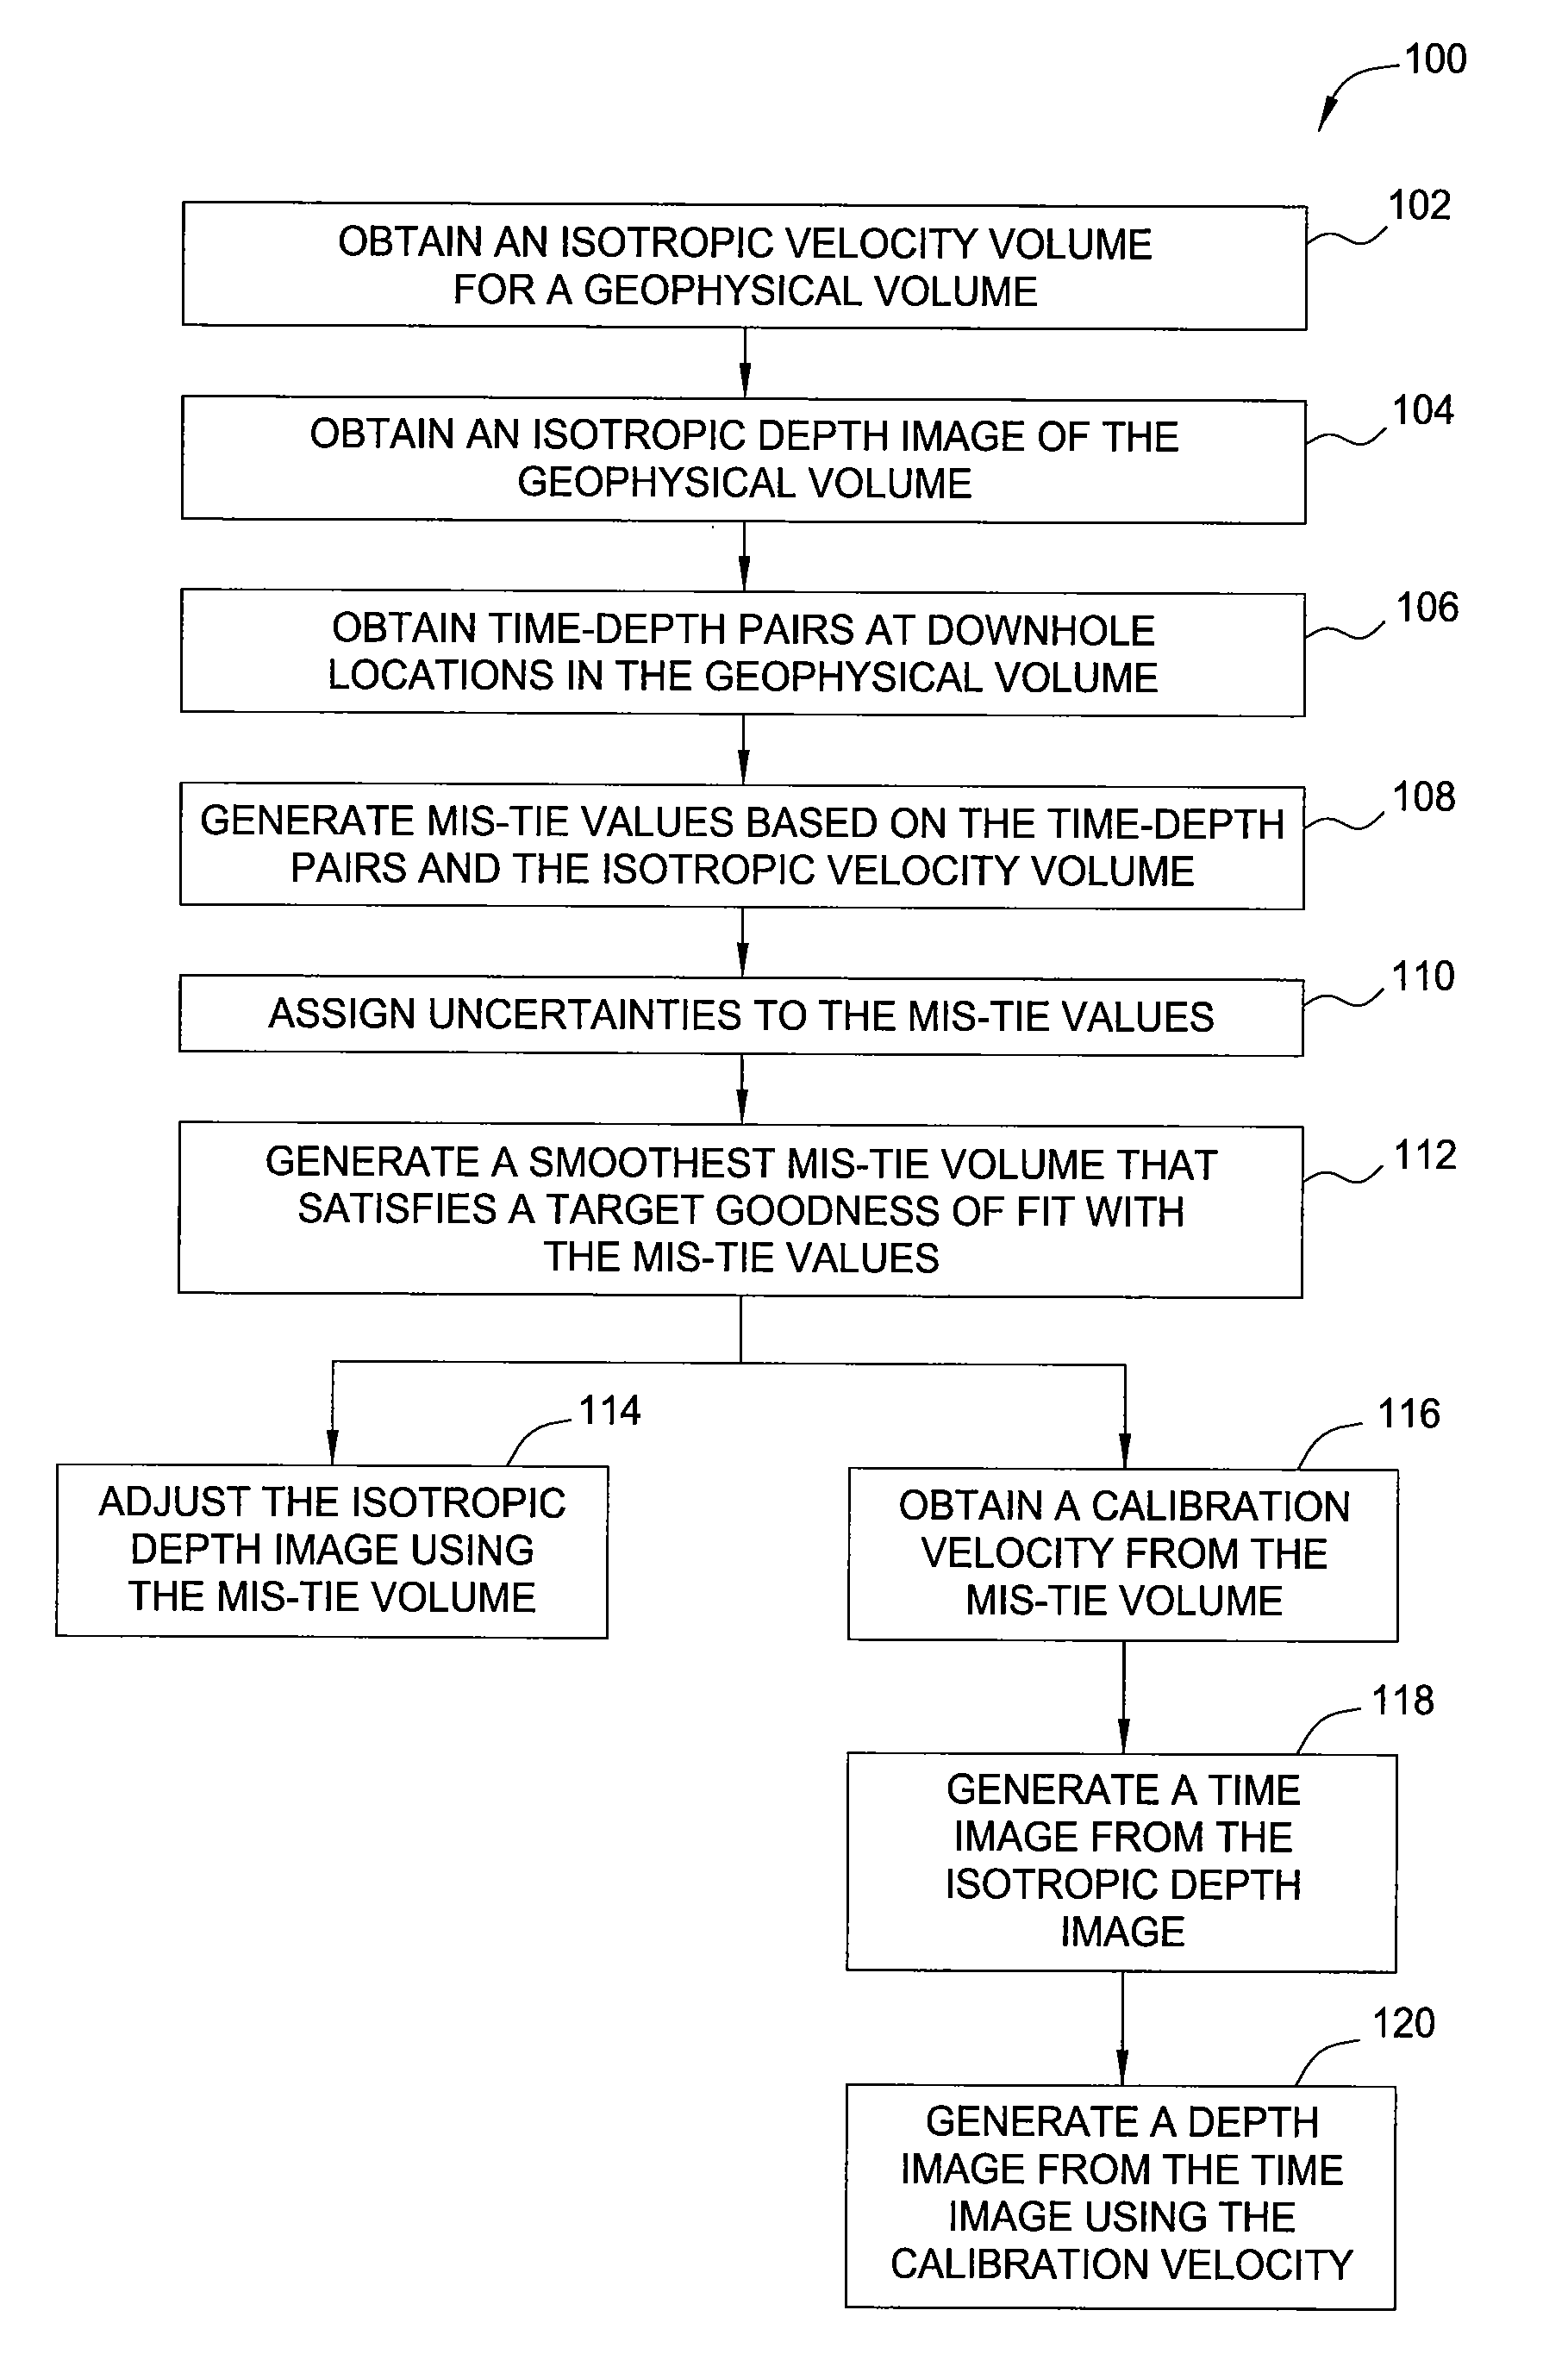 Method for calibrating seismic imaging velocities